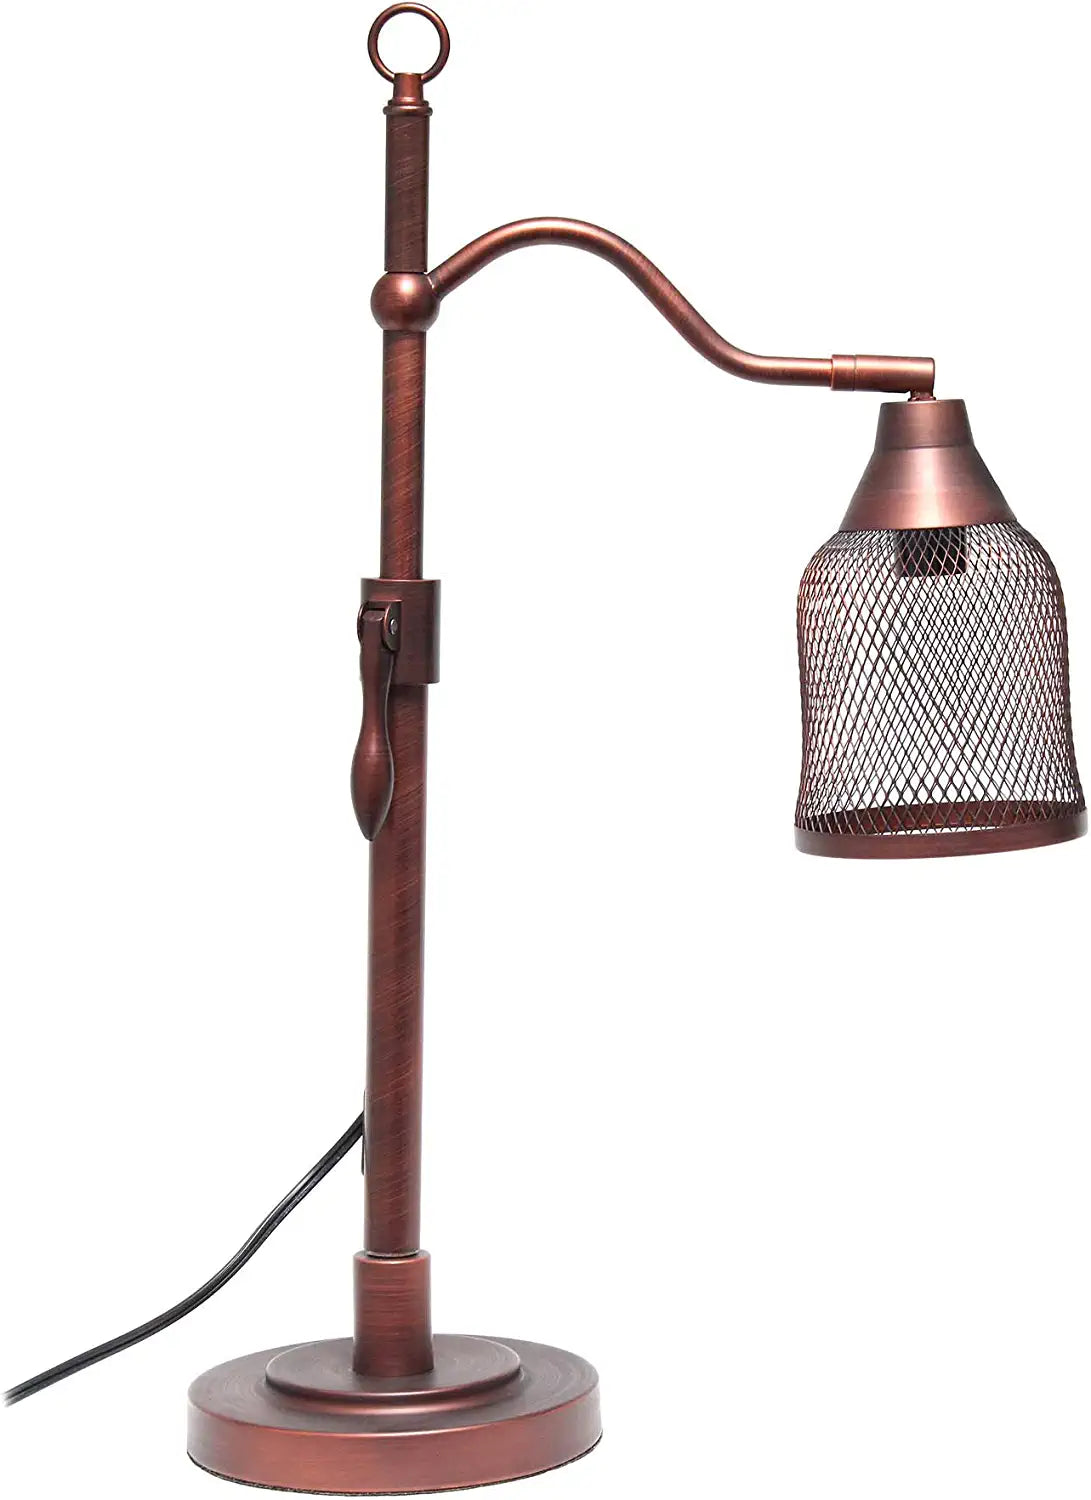 Lalia Home Decorative Vintage Arched Table Lamp with Iron Mesh Shade, Red Bronze